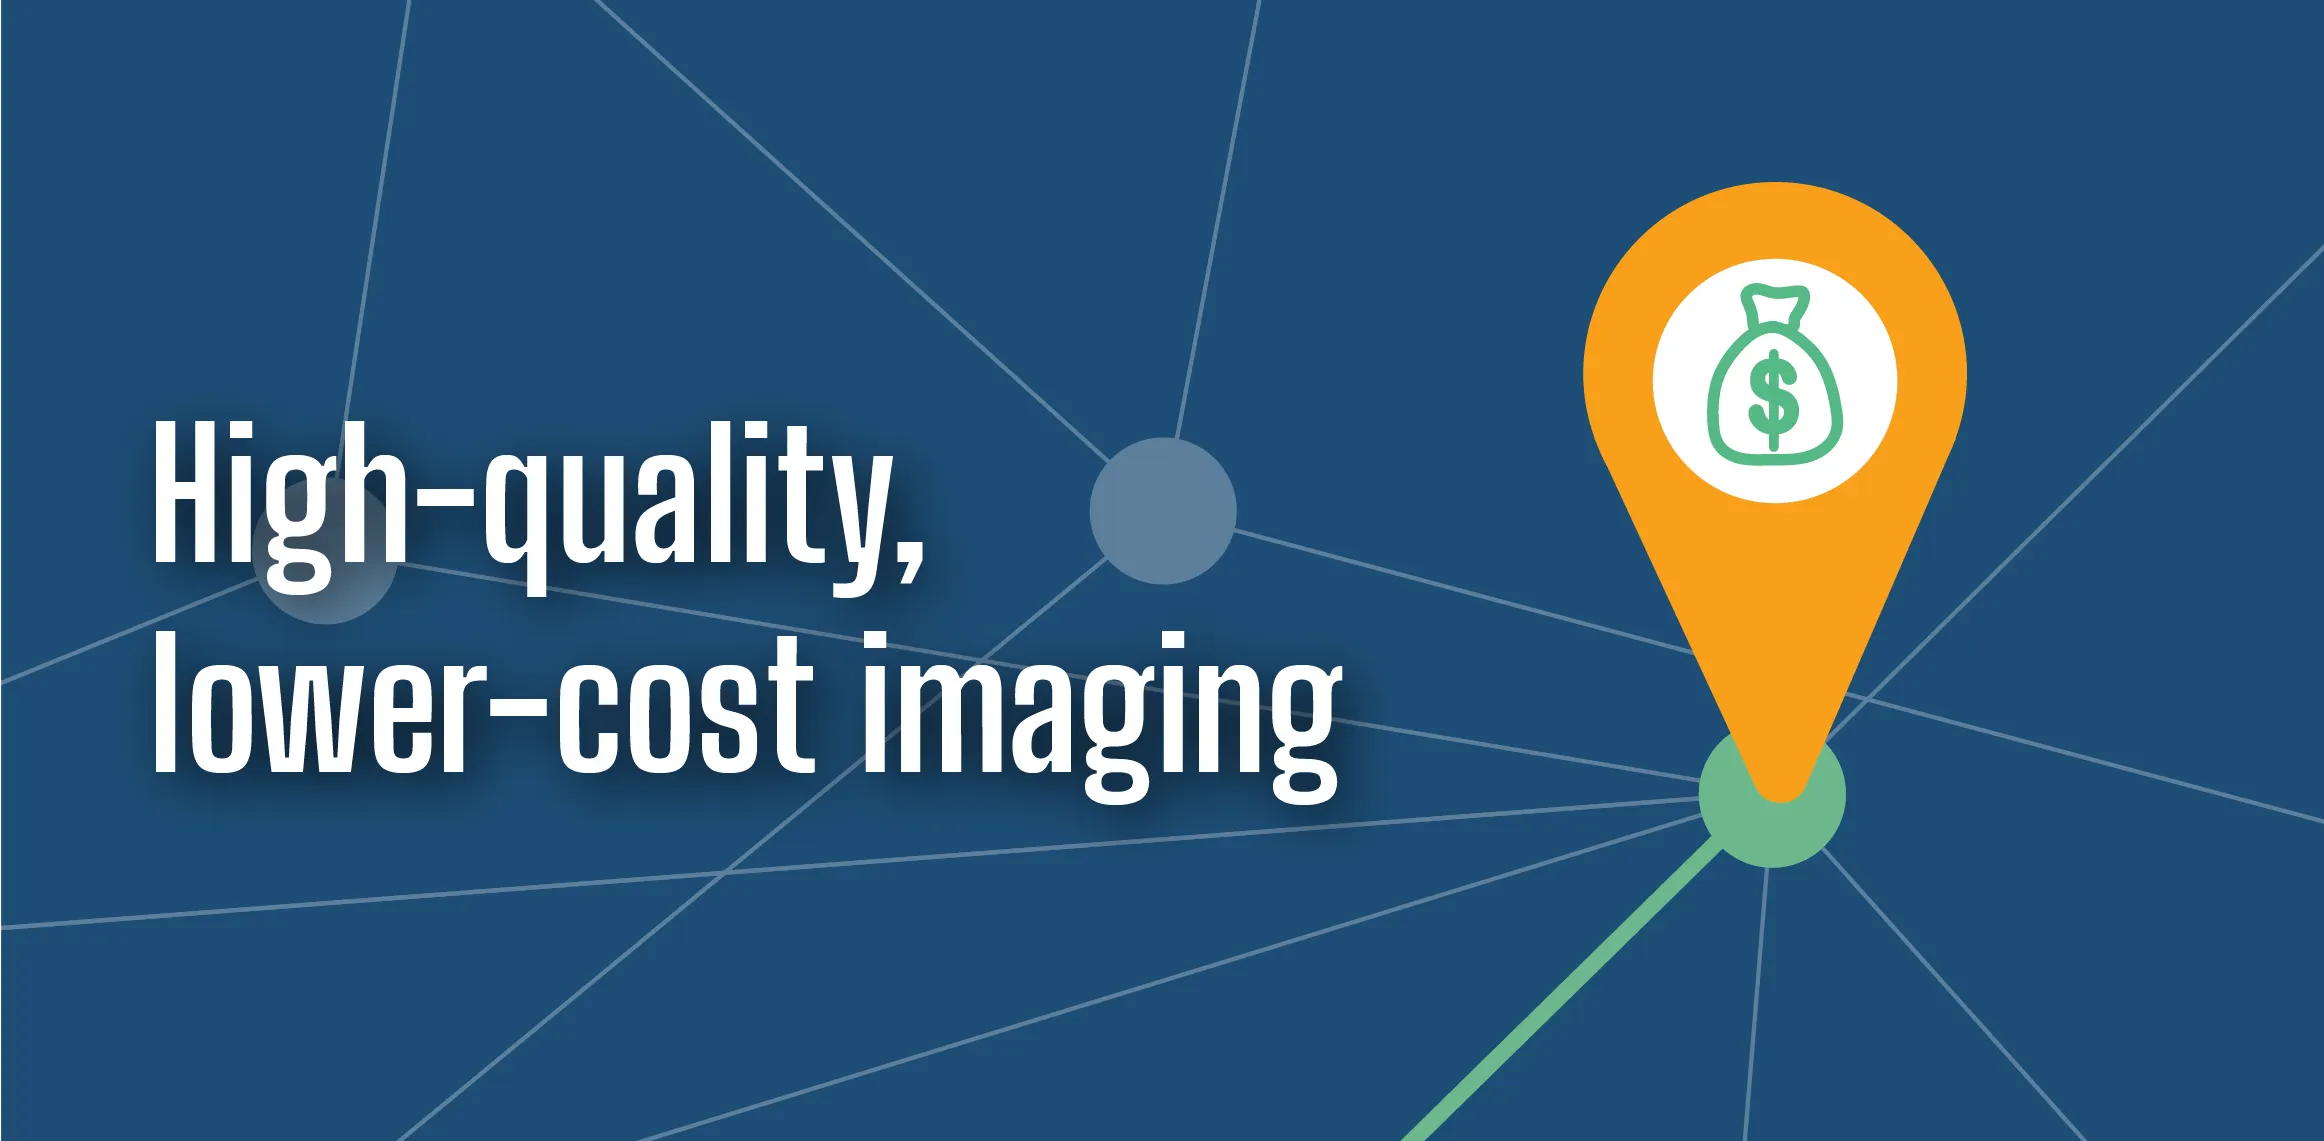 New York Metro's High-quality, lower-cost Imaging